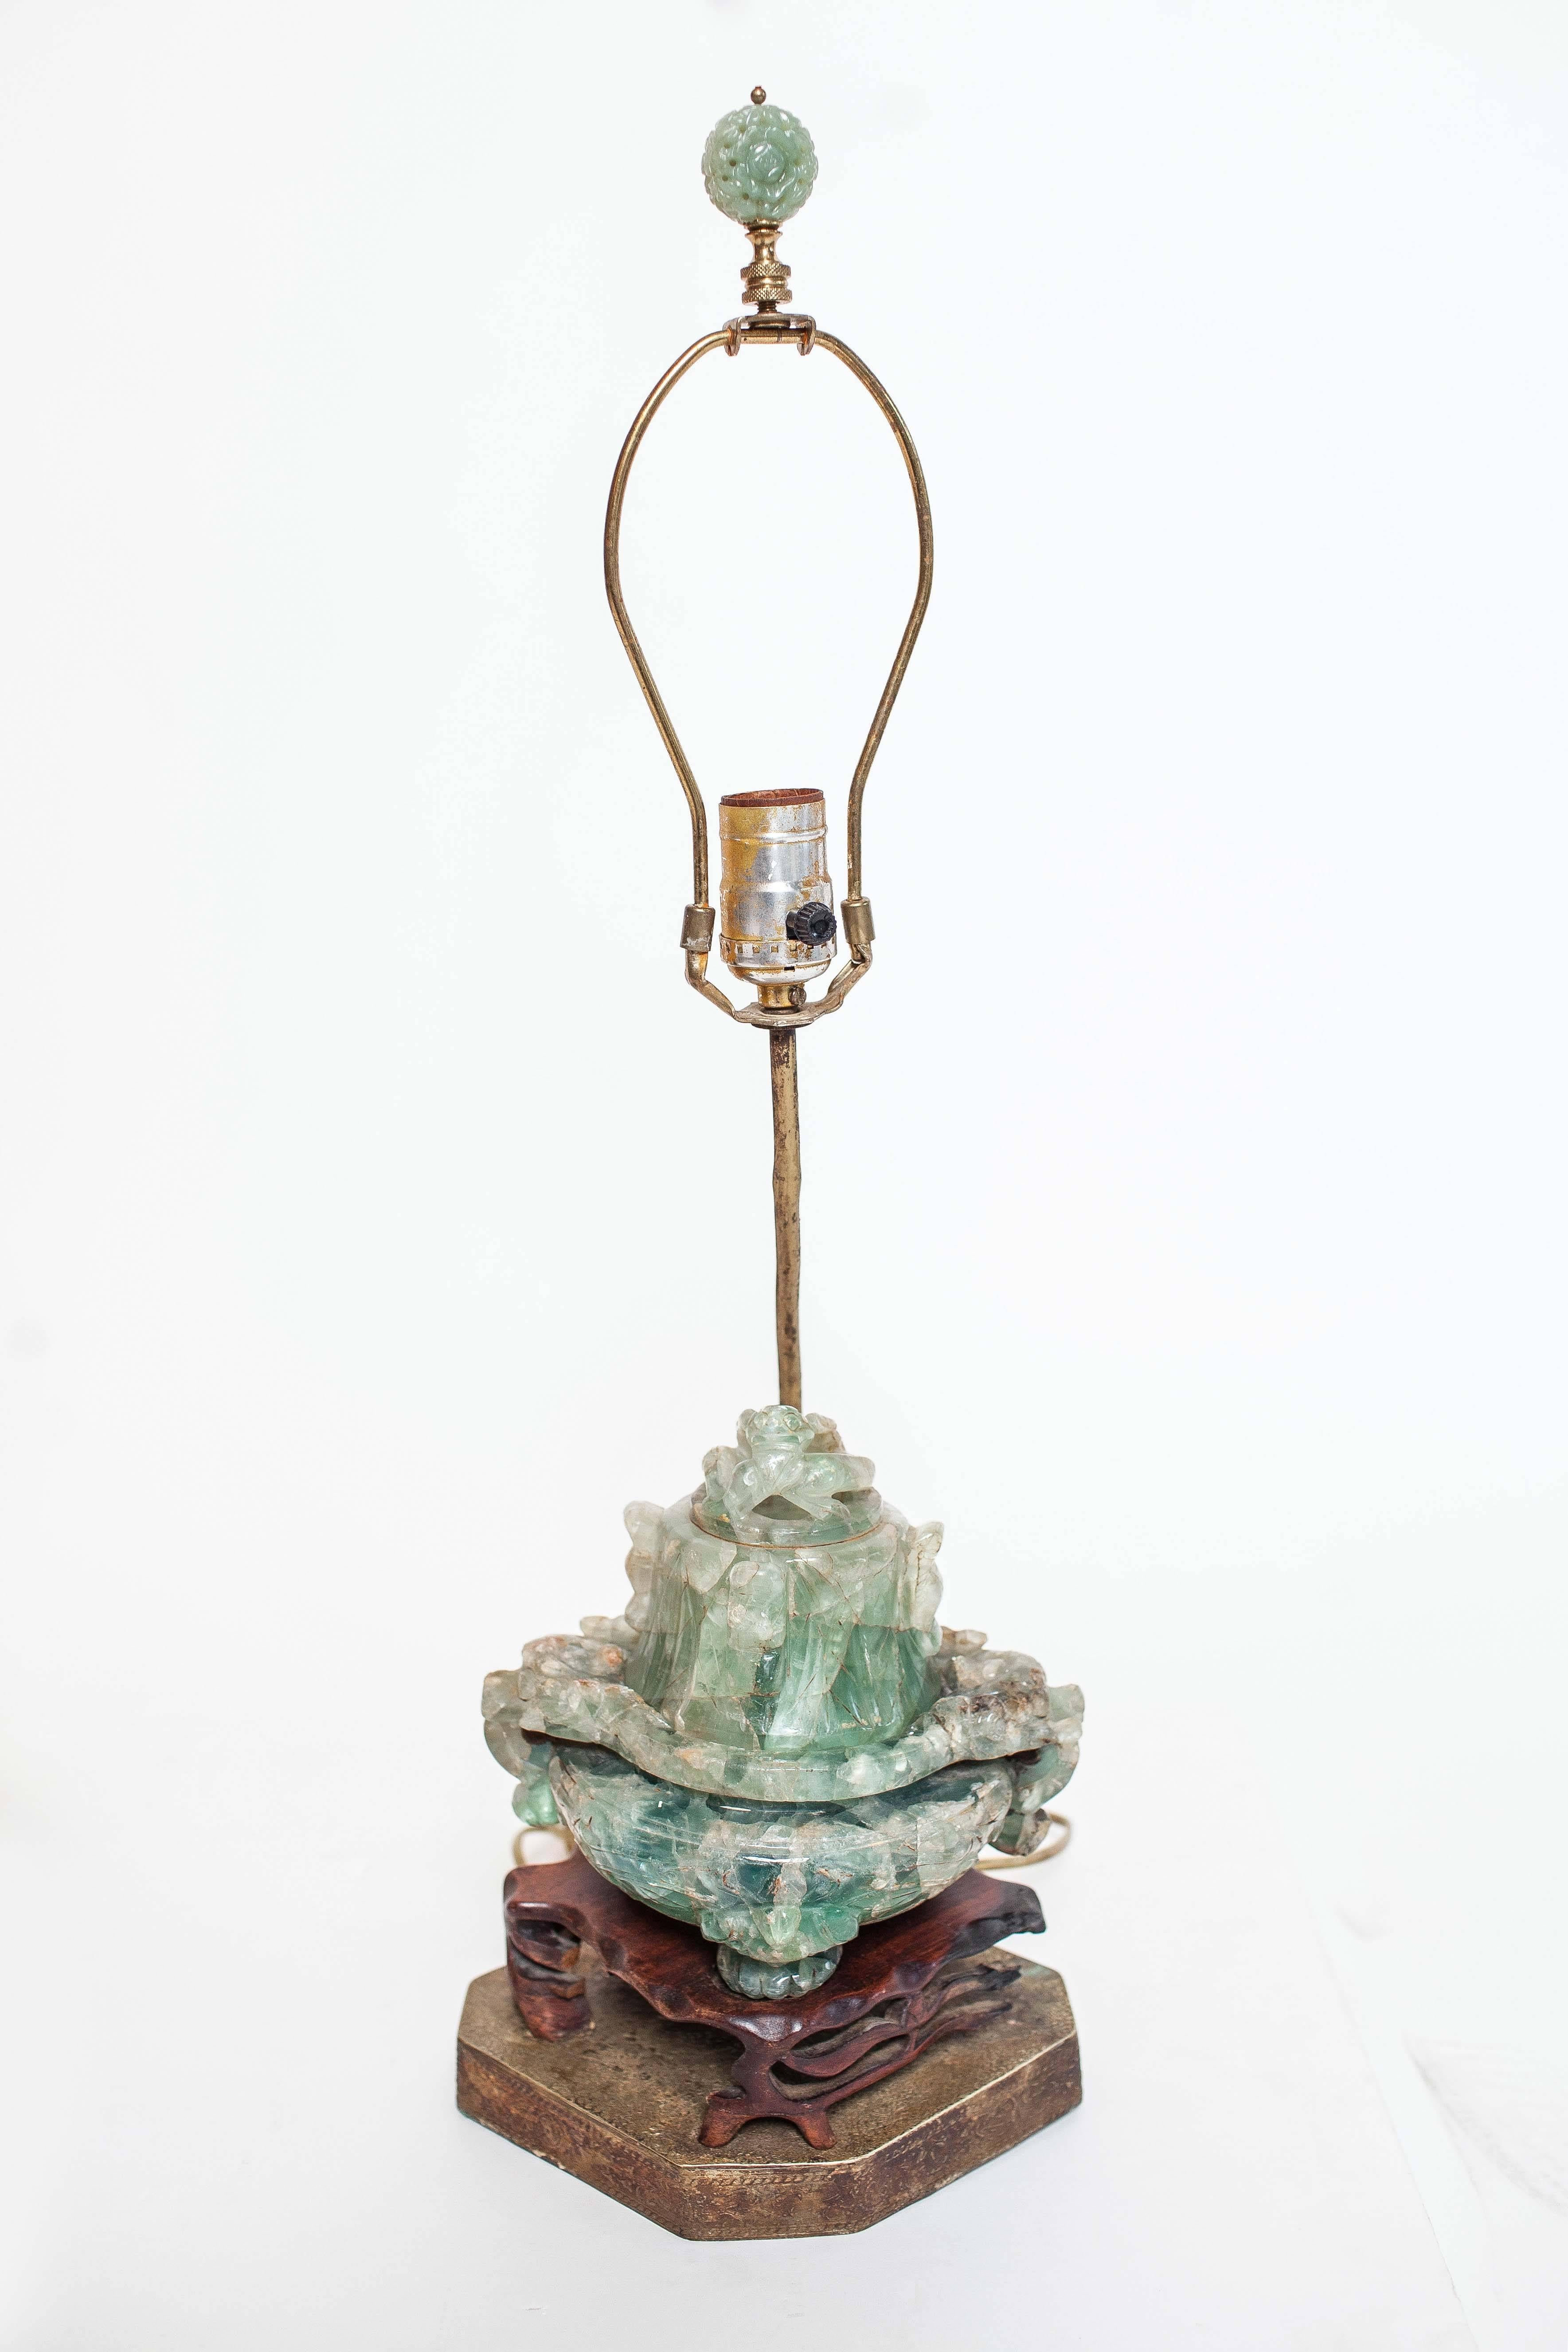 Pair of hand-carved quartz lamps were originally potpourri vessels that were converted to lamps in the 20th century. Mounted on rosewood bases. Removable lid.  Quartz finial.  